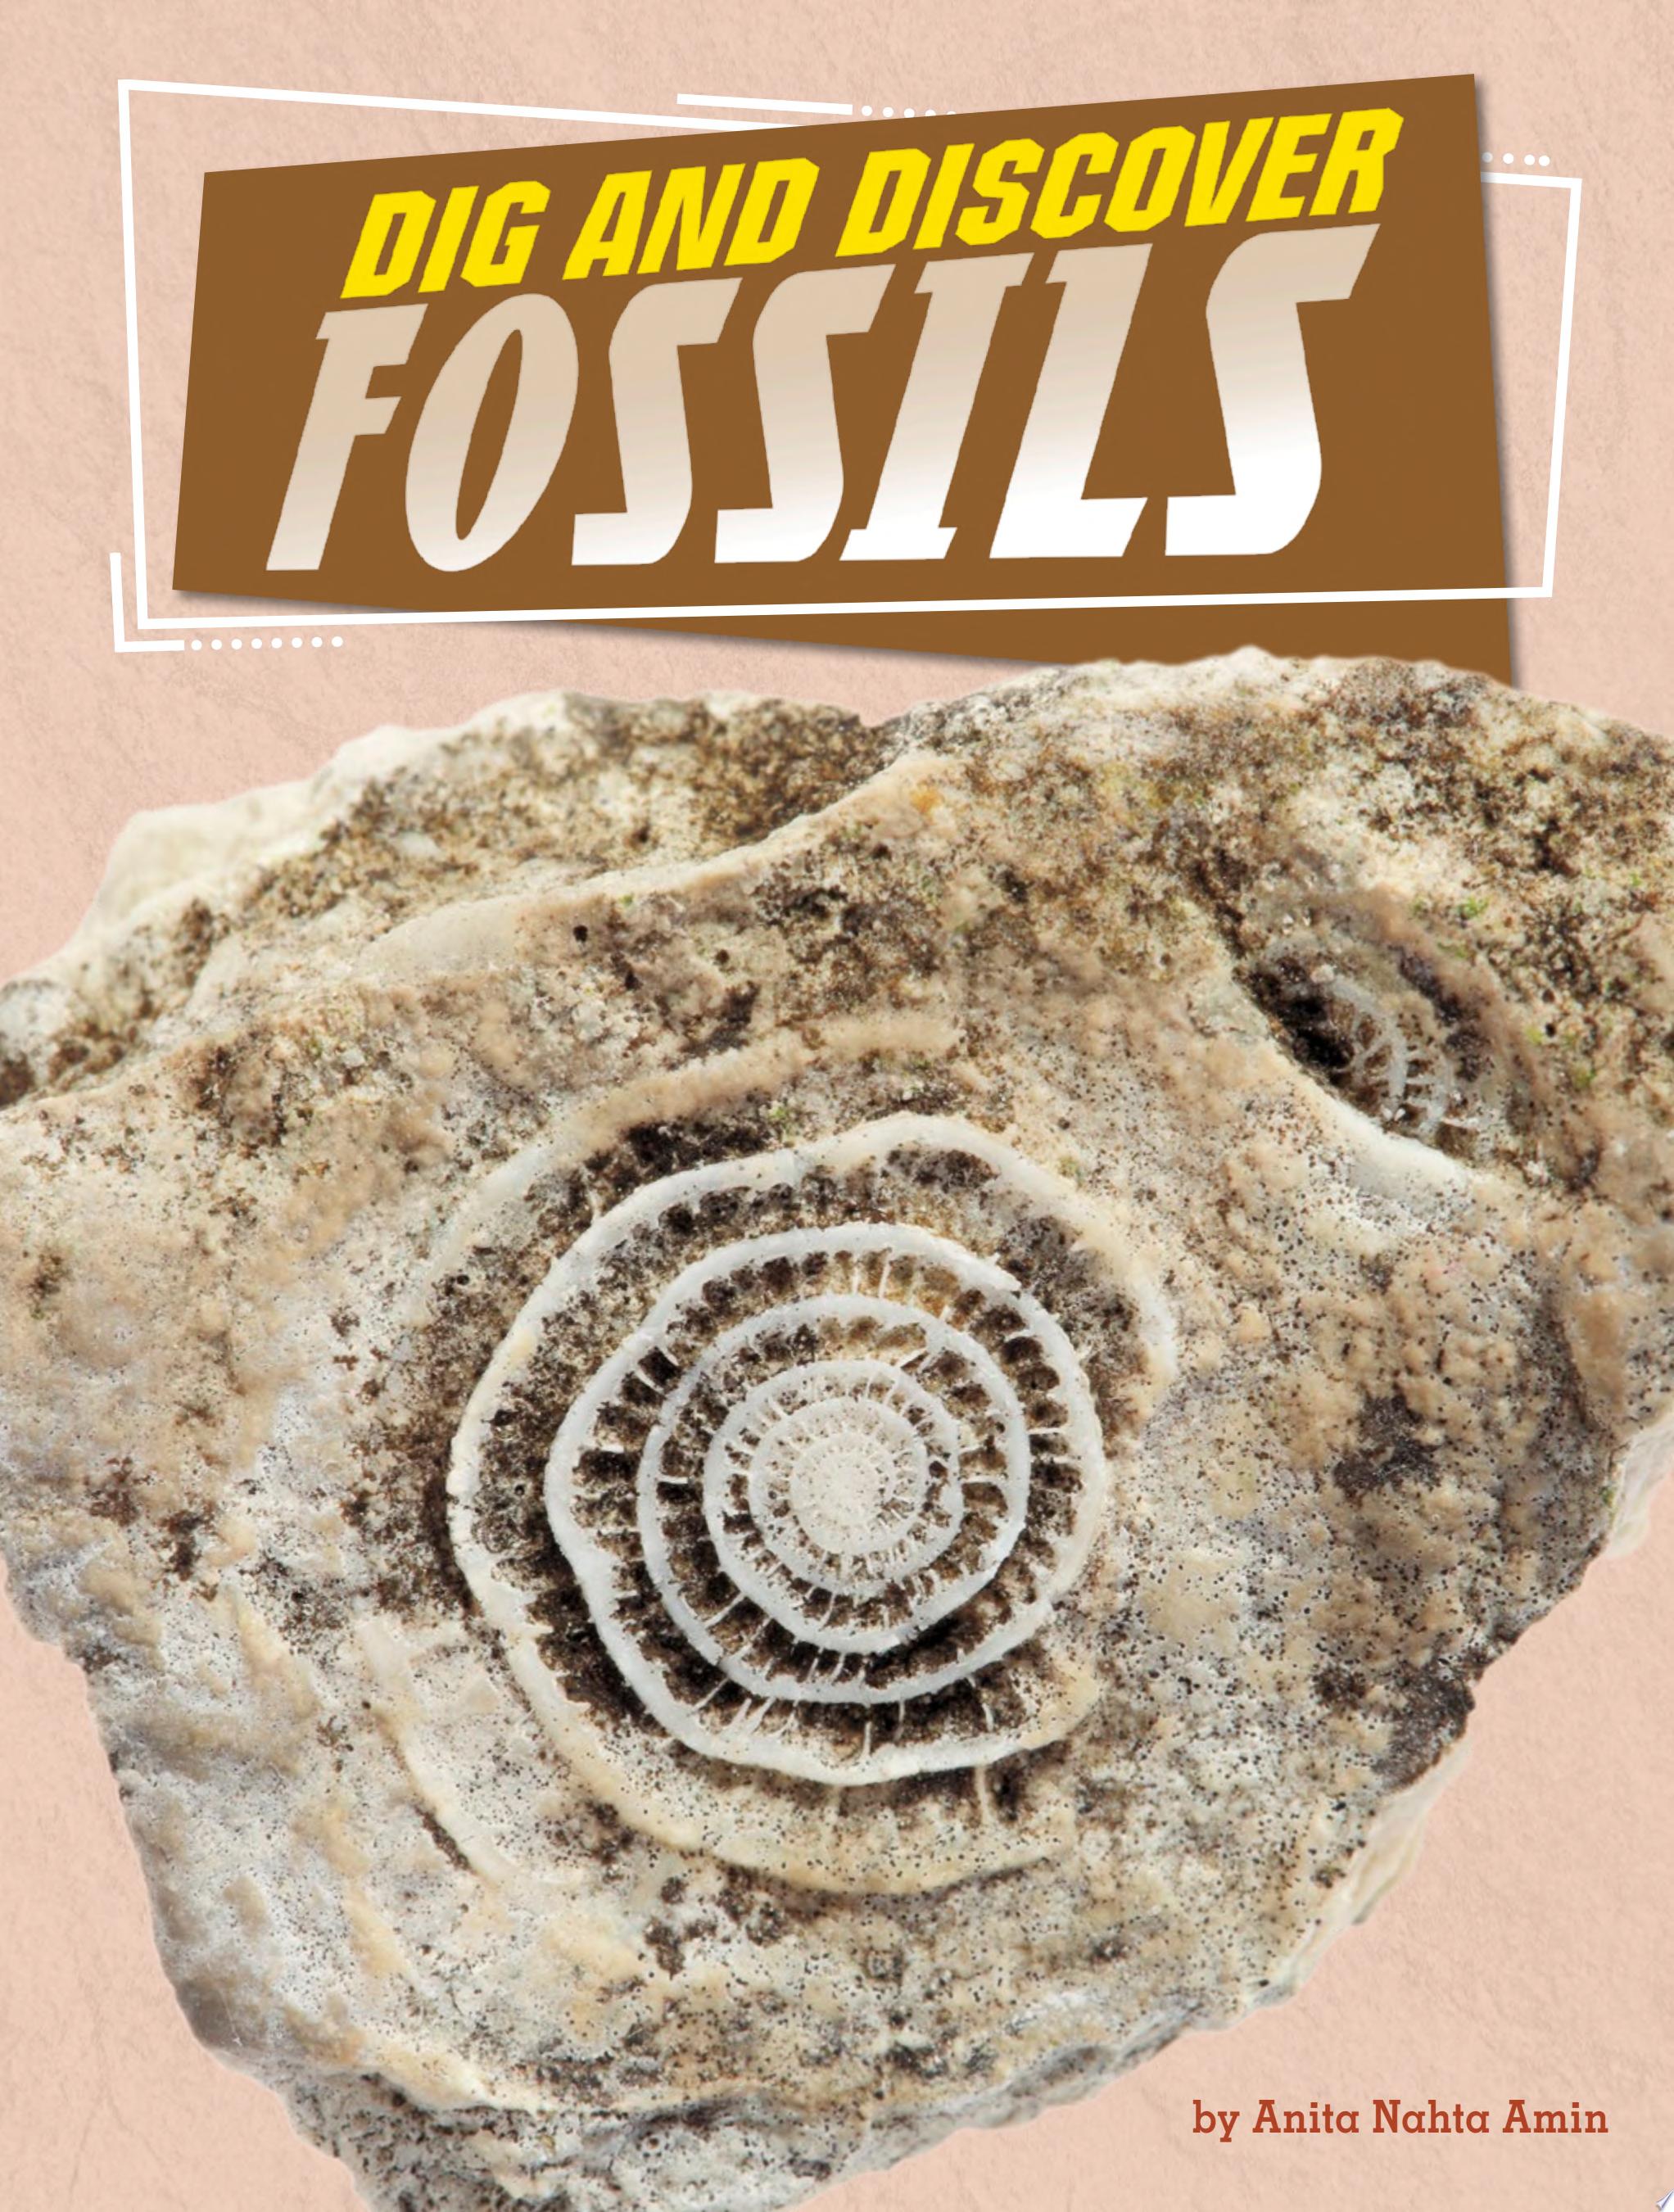 Image for "Dig and Discover Fossils"